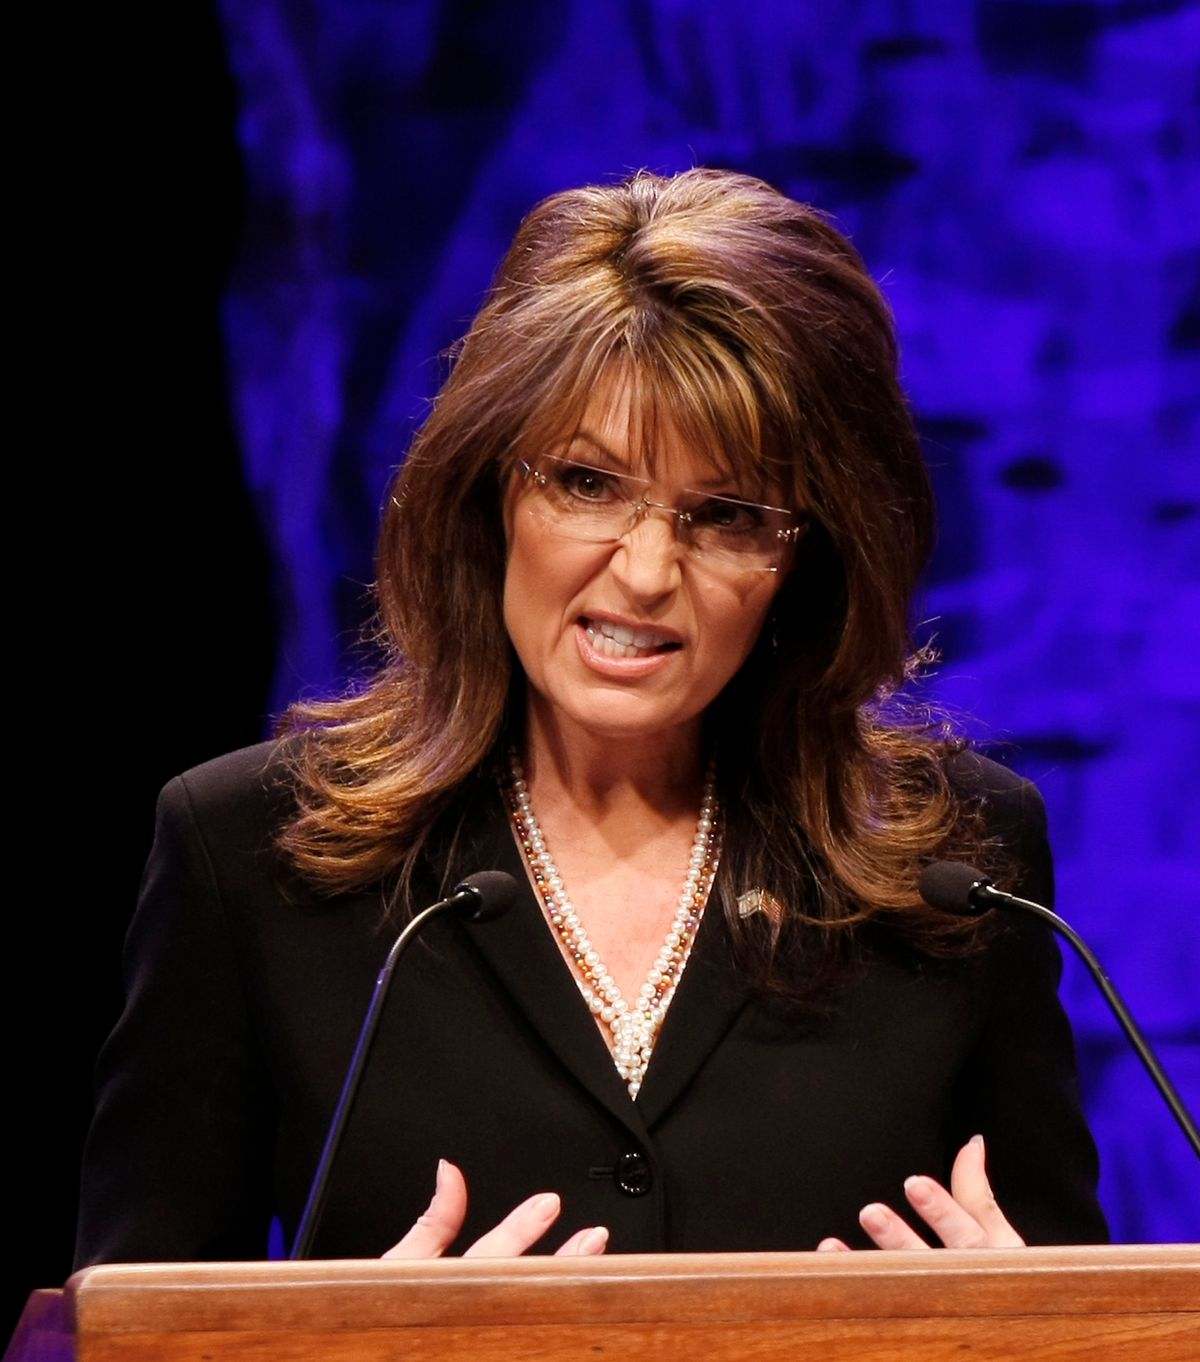 Former vice presidential candidate Sarah Palin addresses attendees at the National Tea Party Convention in Nashville, Saturday, Feb. 6, 2010.  (AP Photo/Ed Reinke) (Ed Reinke)